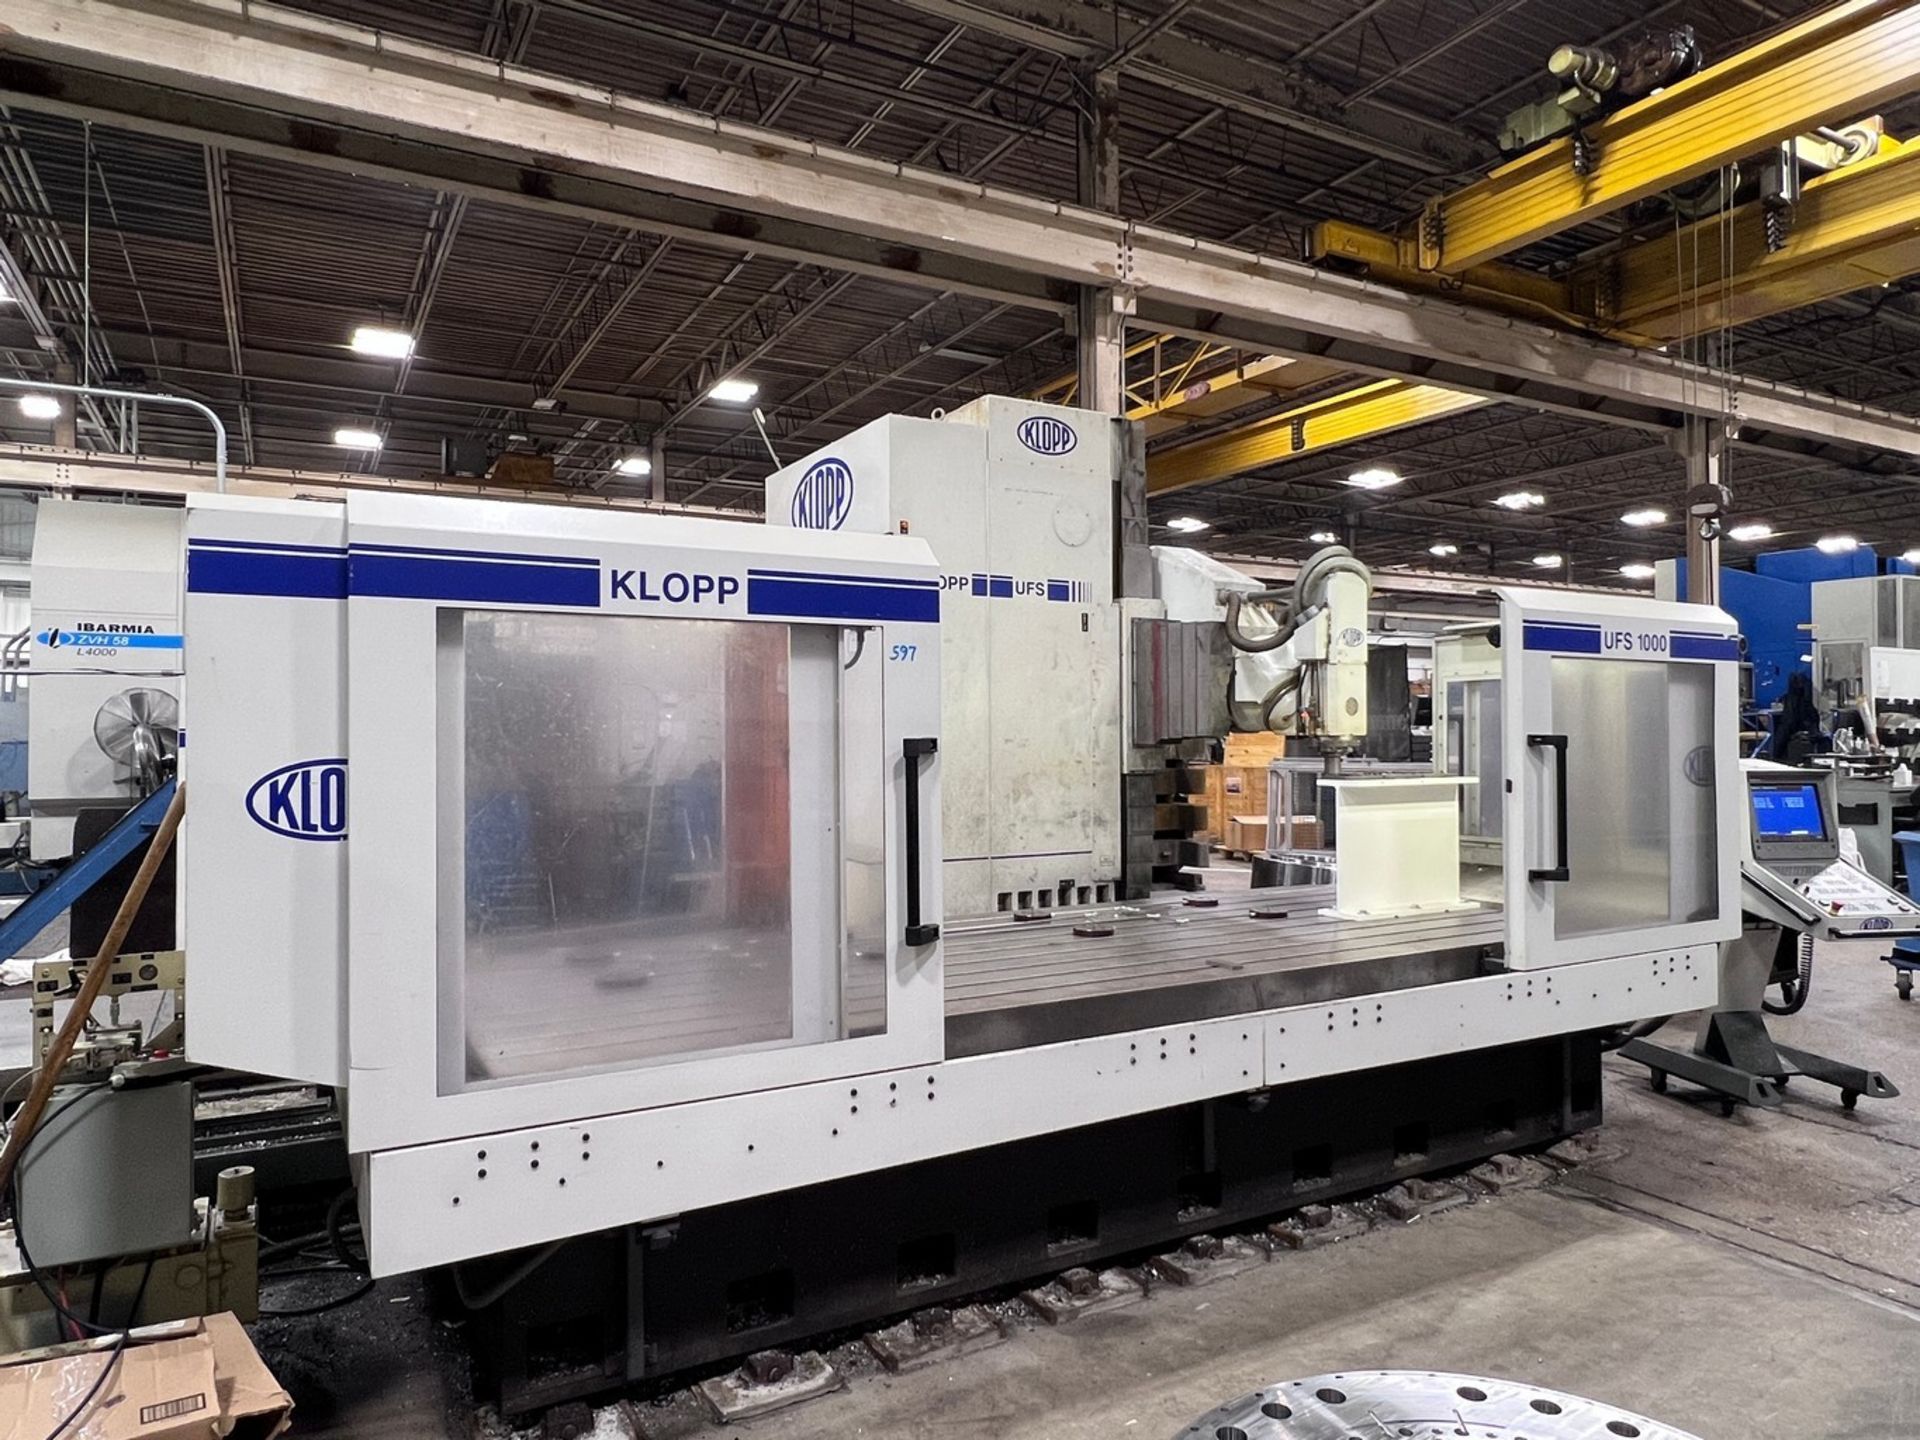 2007 Klopp UFS1000 CNC 5-Axis Travelling Column Milling Machine - Image 2 of 10